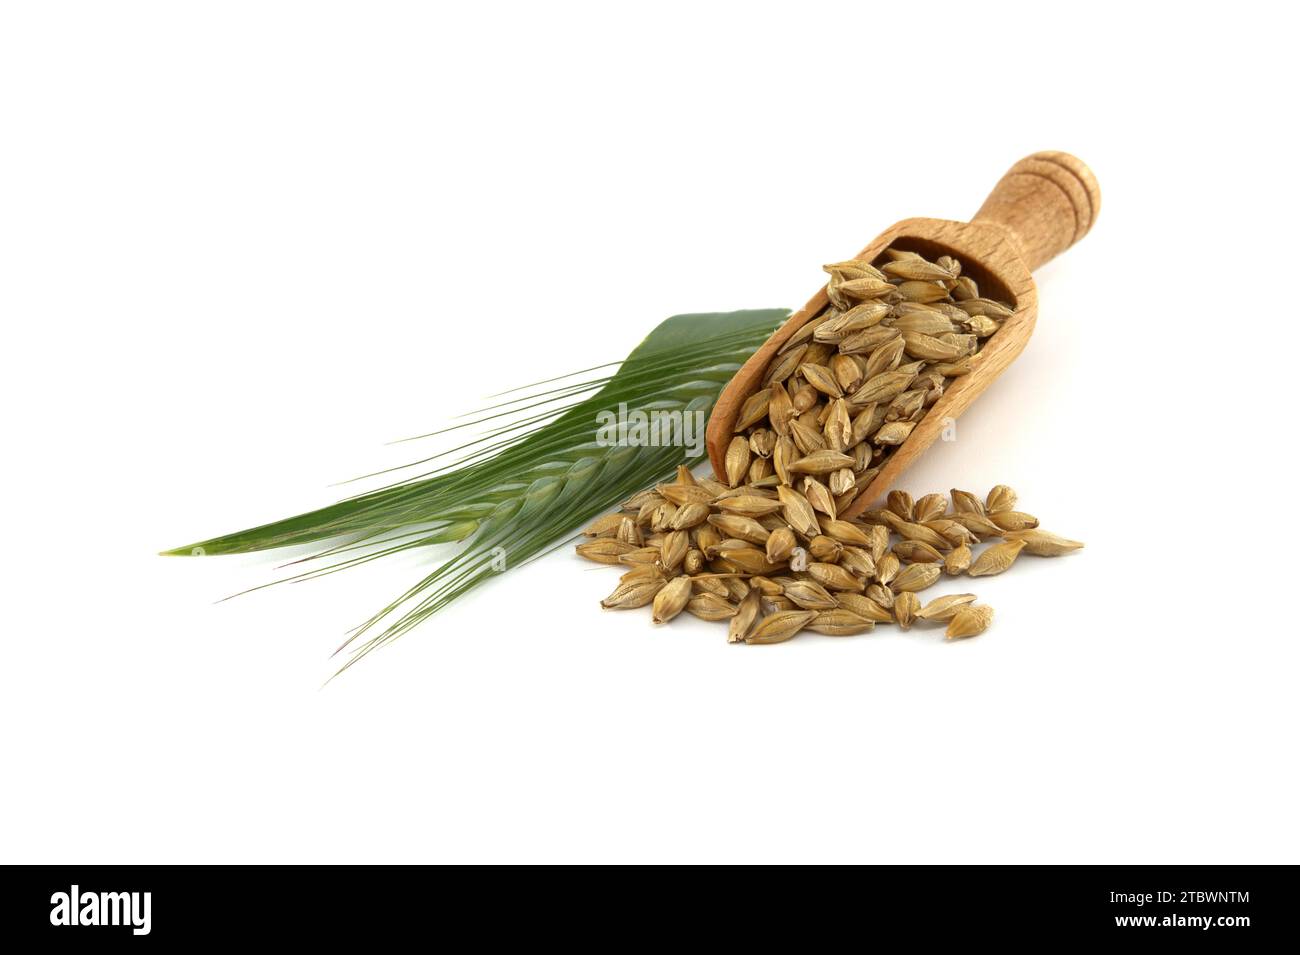 Barley (Hordeum vulgare) grain seeds spilling from wooden scoop near to barley ears over white background Stock Photo